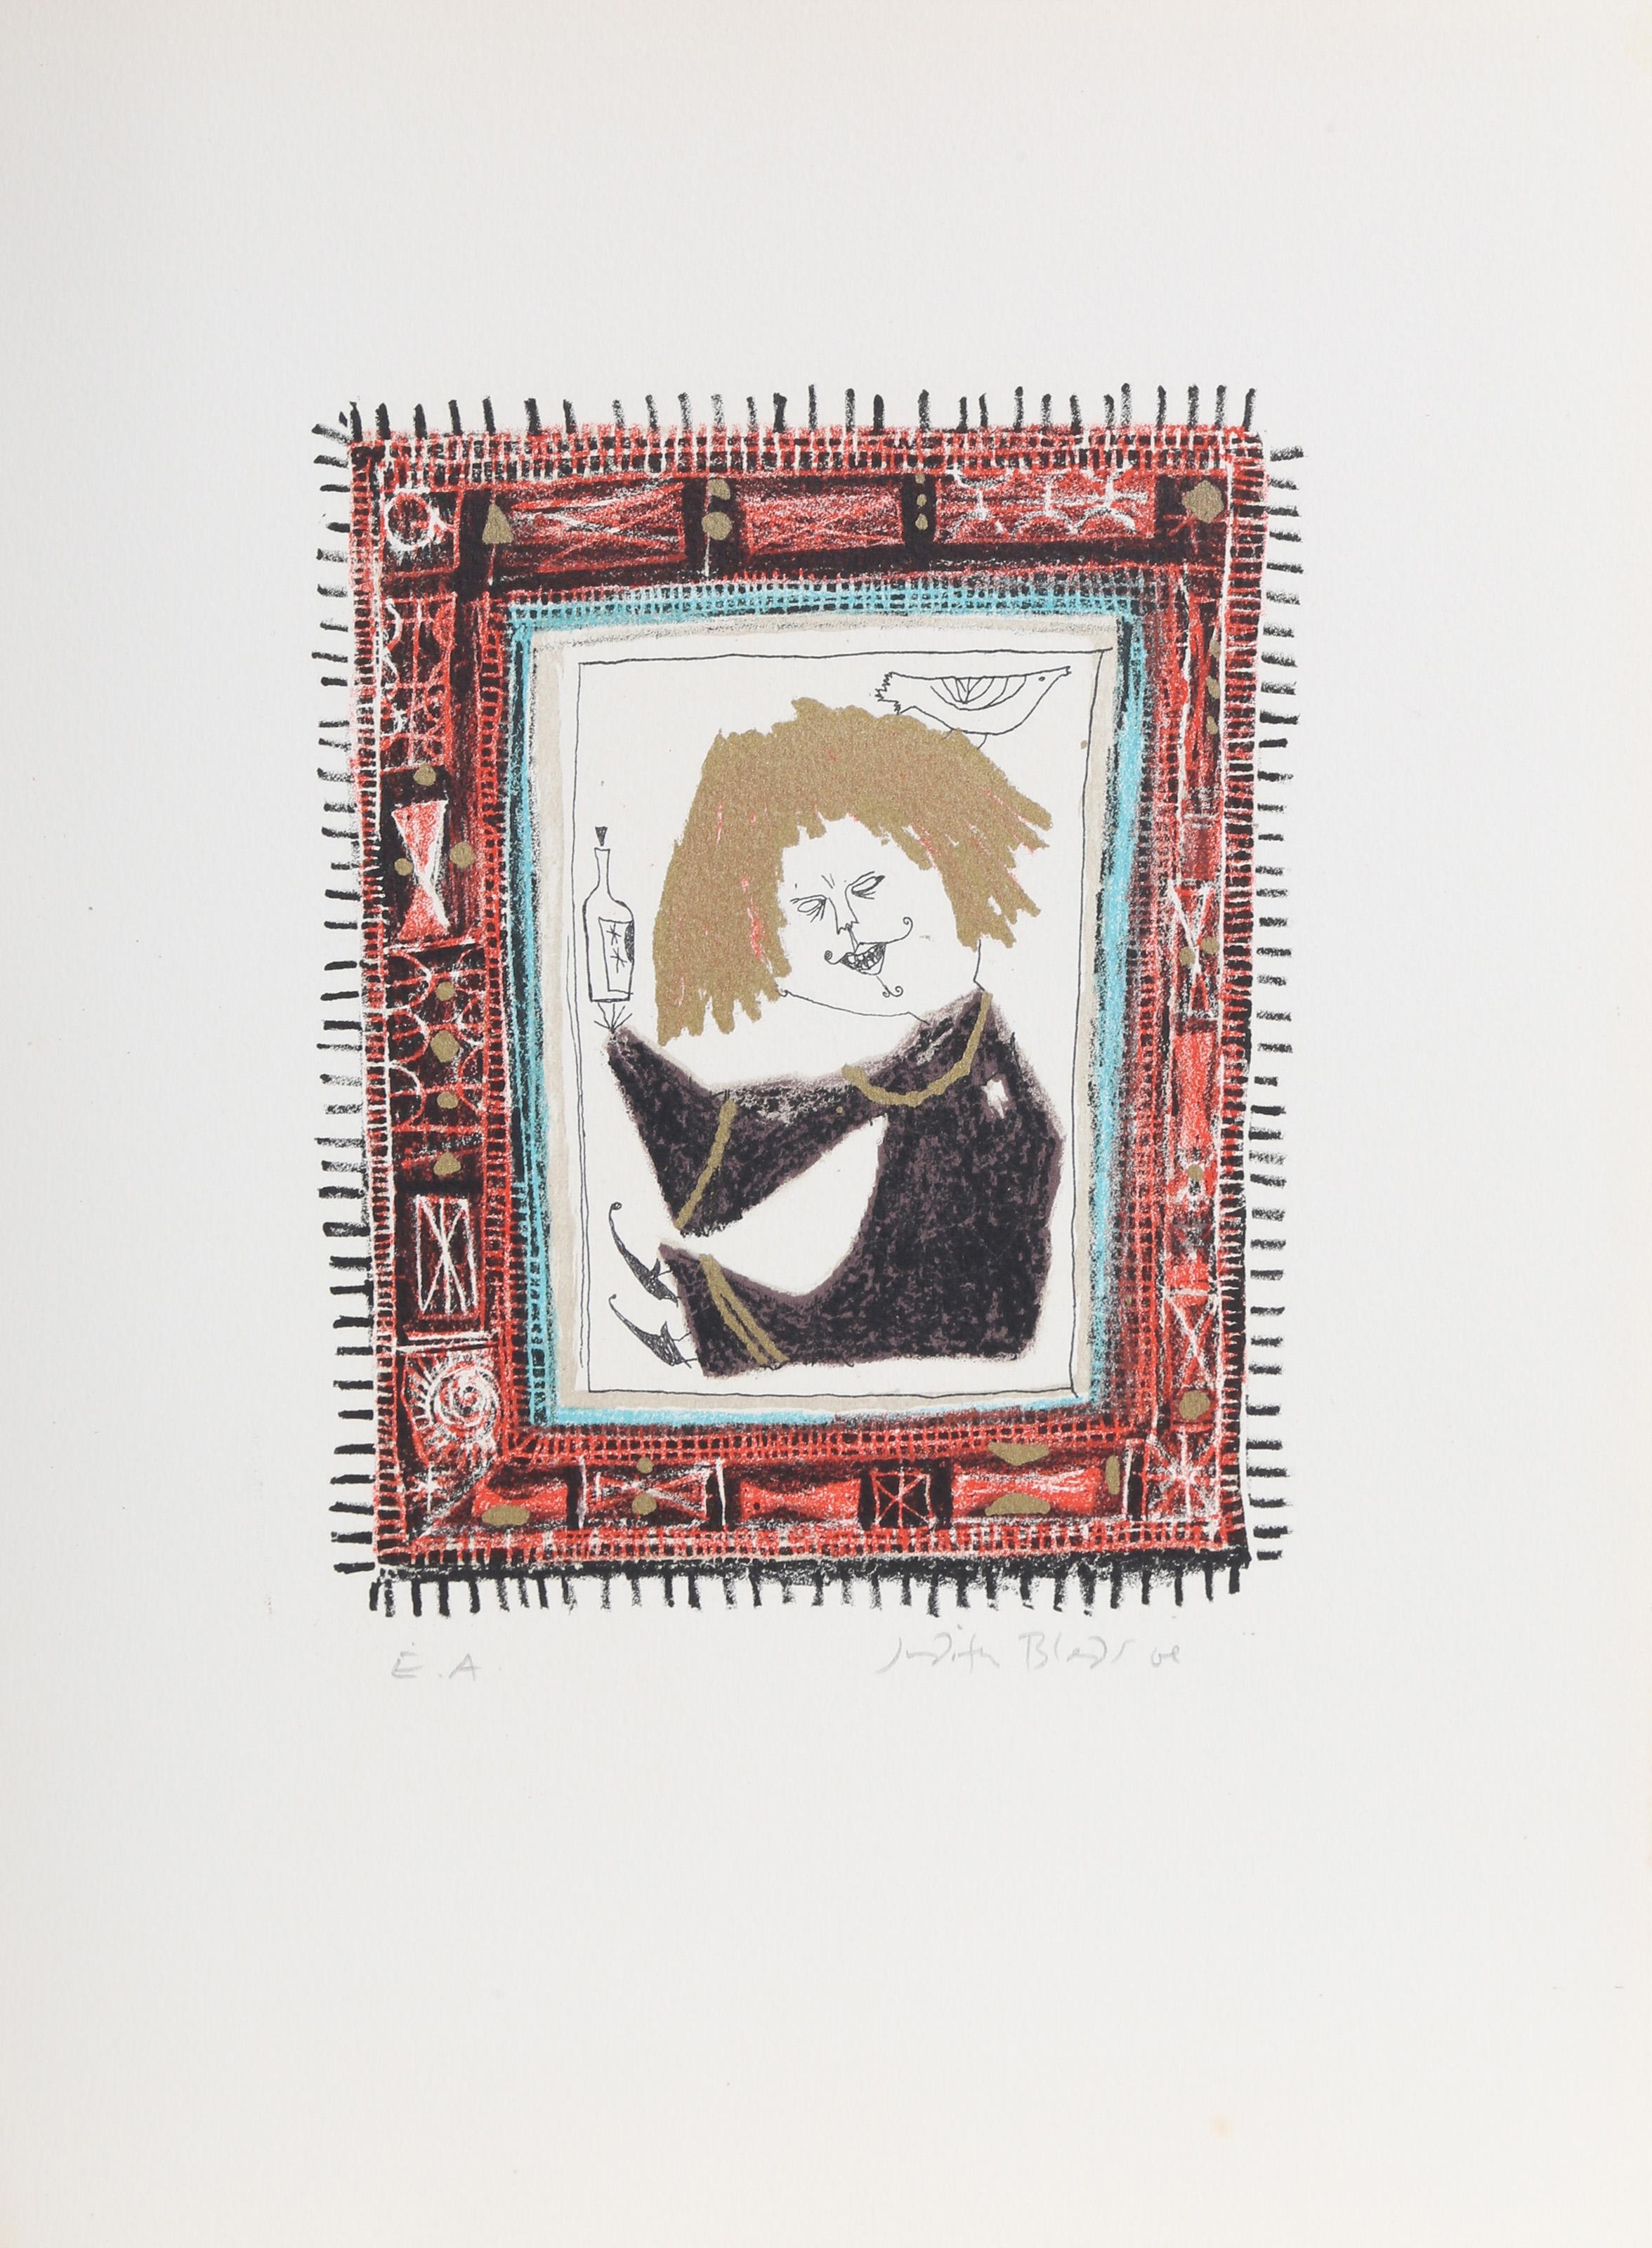 Judith Bledsoe, American (1938 - 2013) -  Petite Portrait - Witch. Year: circa 1974, Medium: Lithograph, signed and numbered in pencil, Edition: EA, Image Size: 8 x 6 inches, Size: 15  x 10.5 in. (38.1  x 26.67 cm), Description: Sitting with her